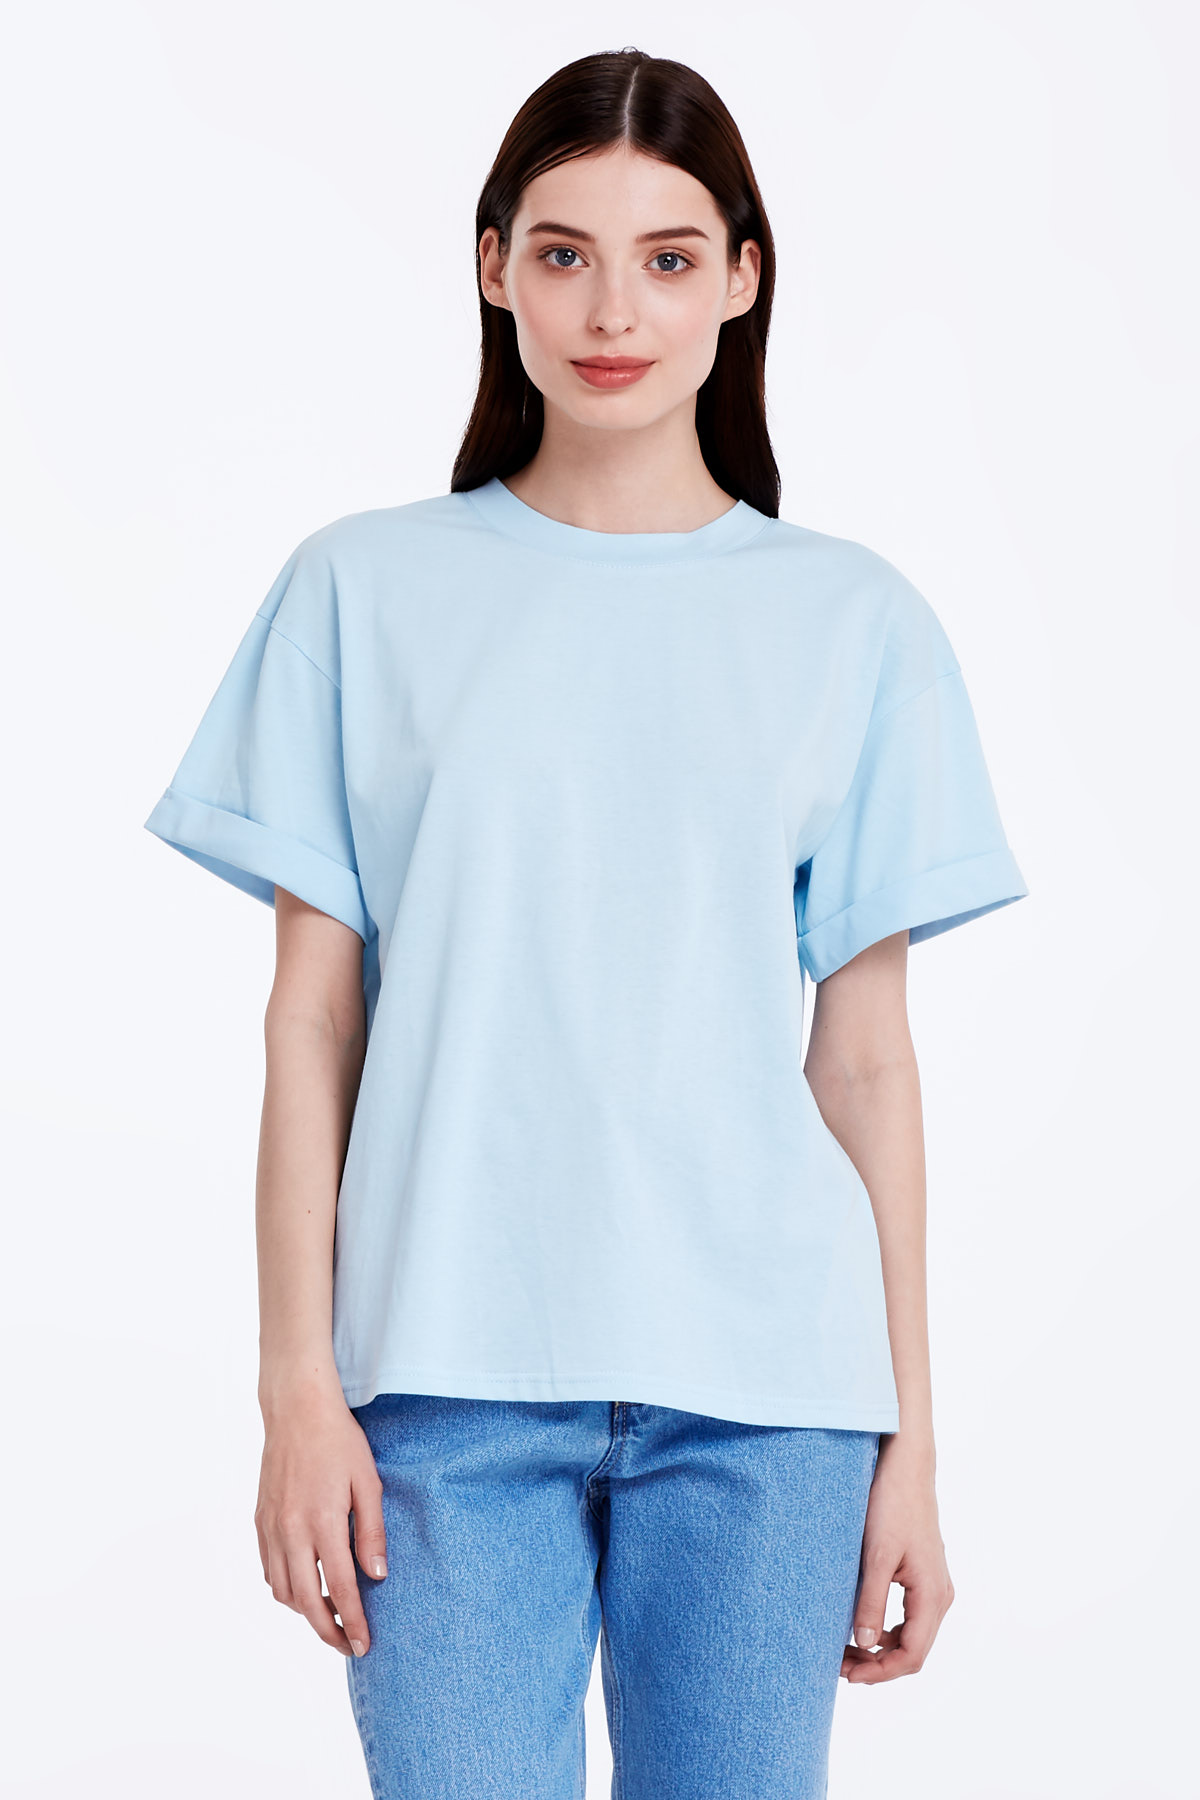 Loose-fitting blue T-shirt with cuffs, photo 1